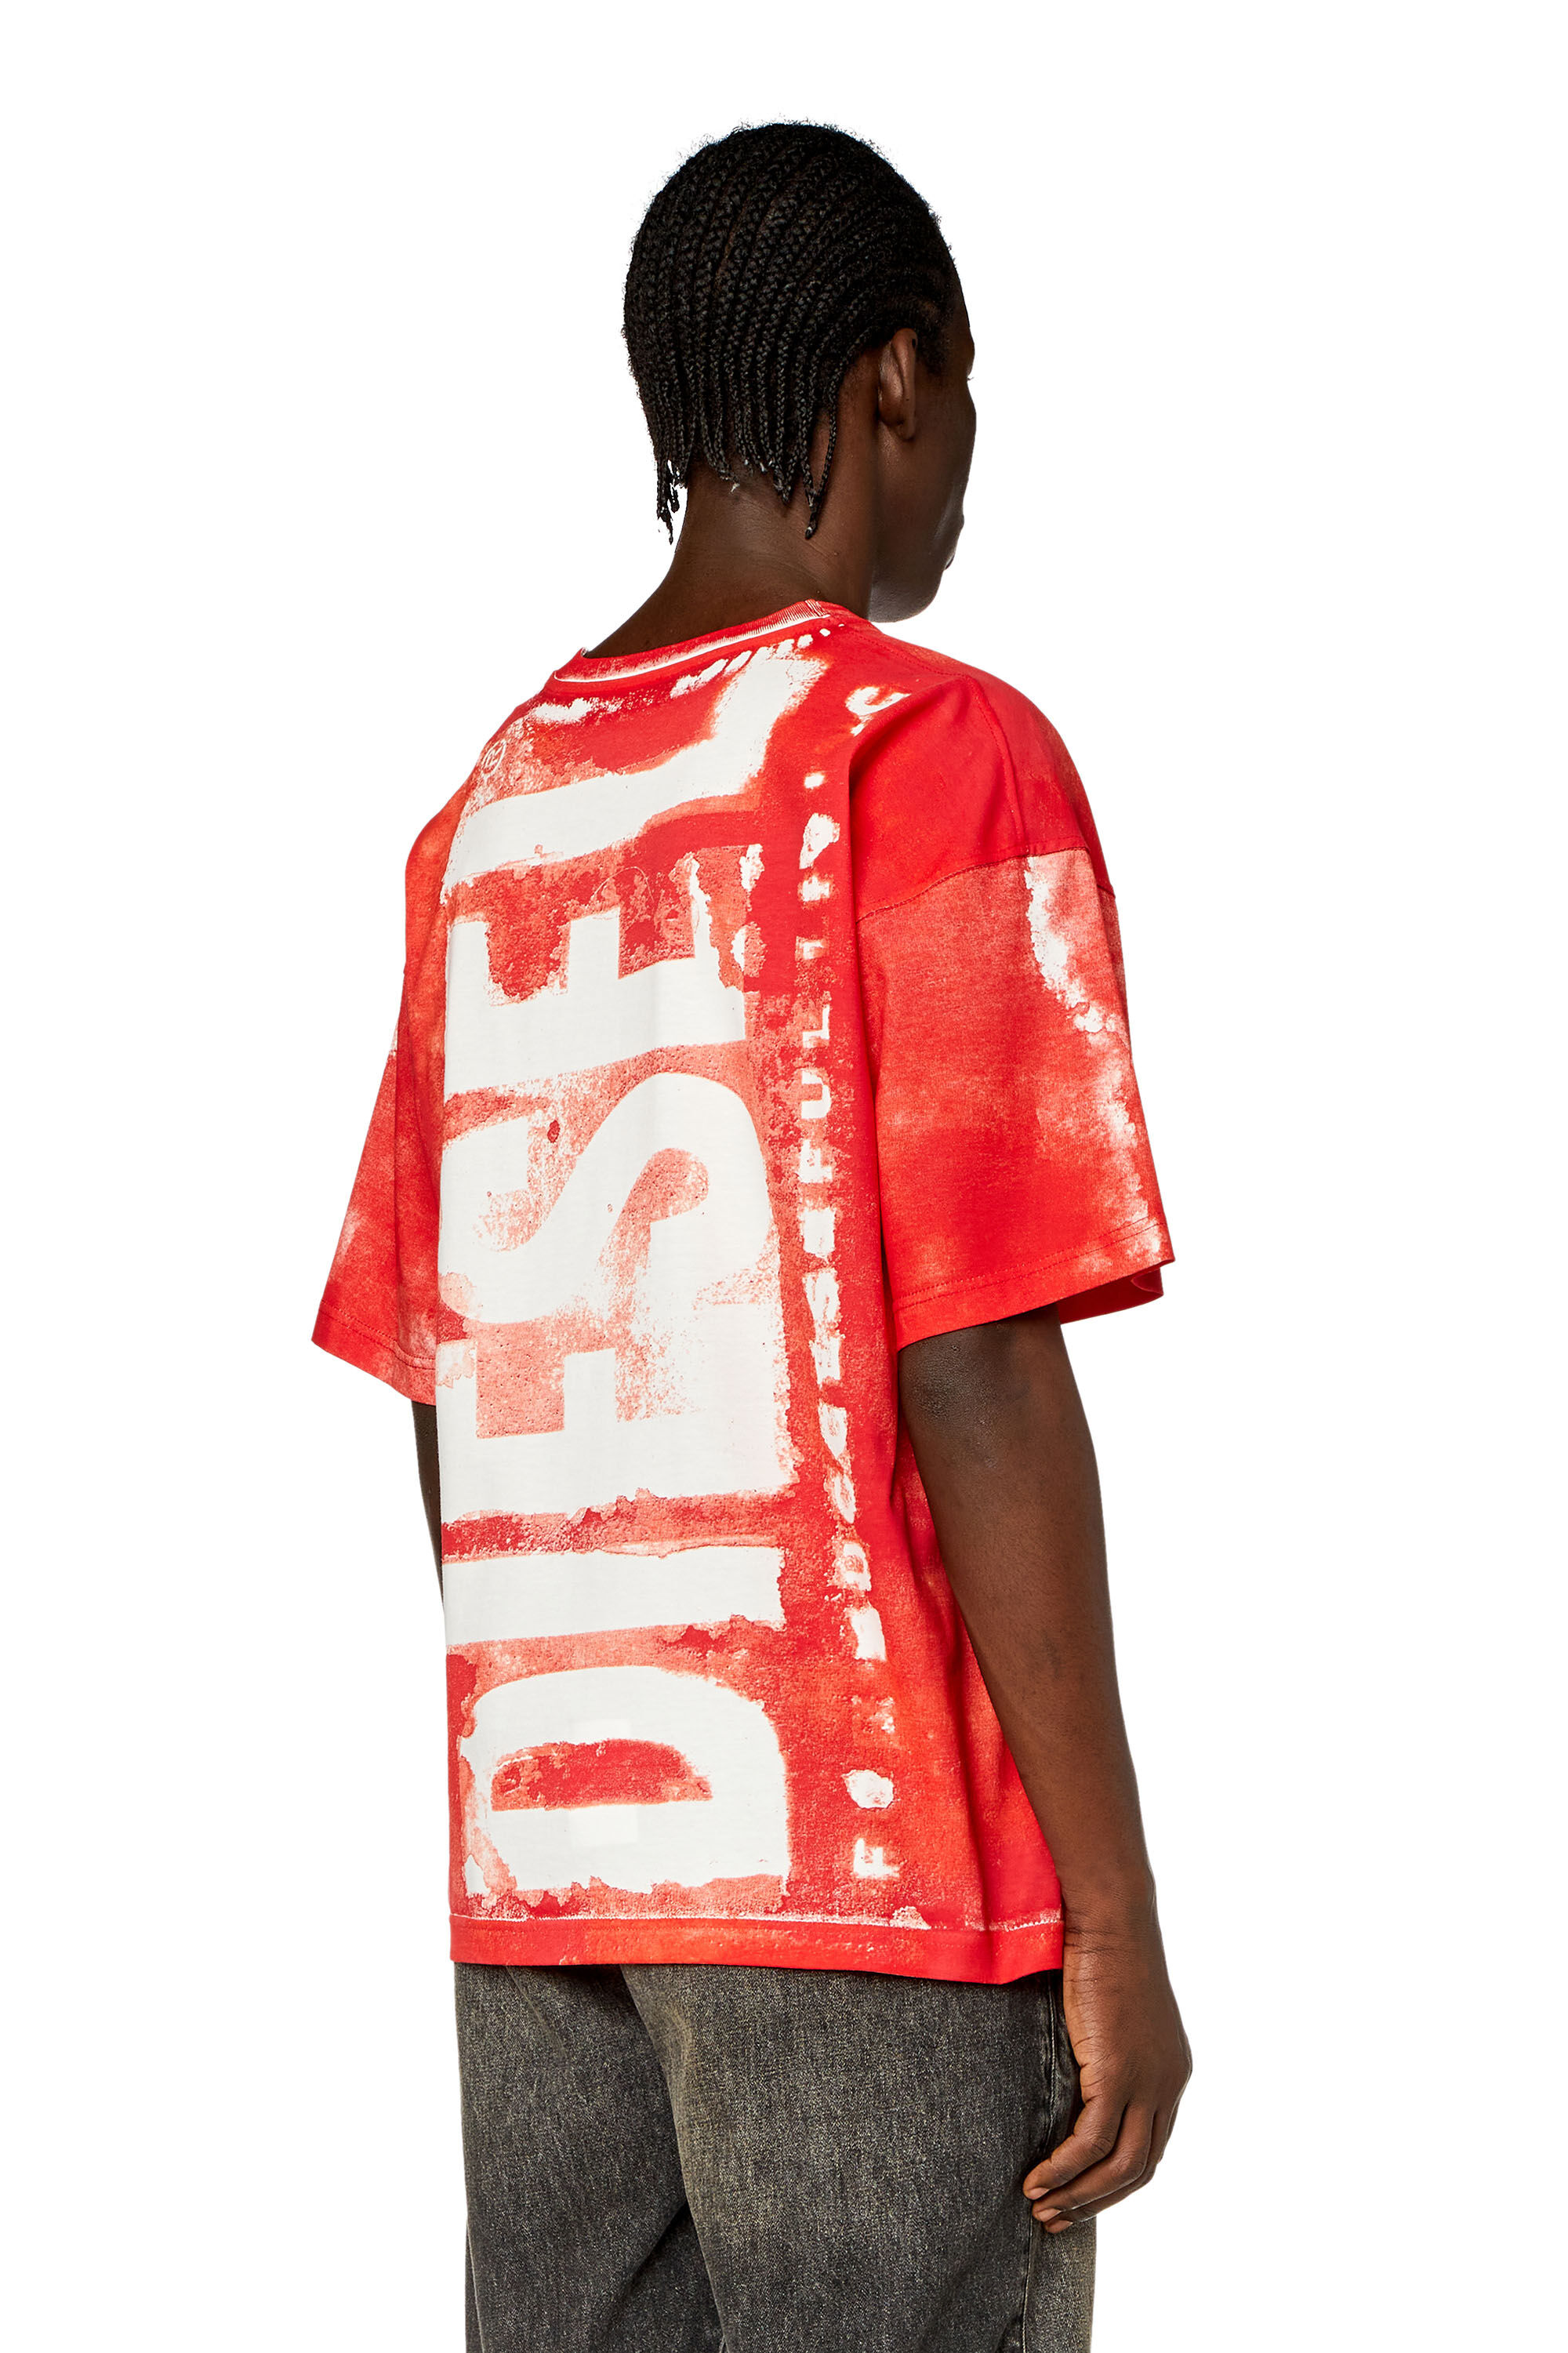 Diesel - T-BOXT-BISC, Rojo - Image 3